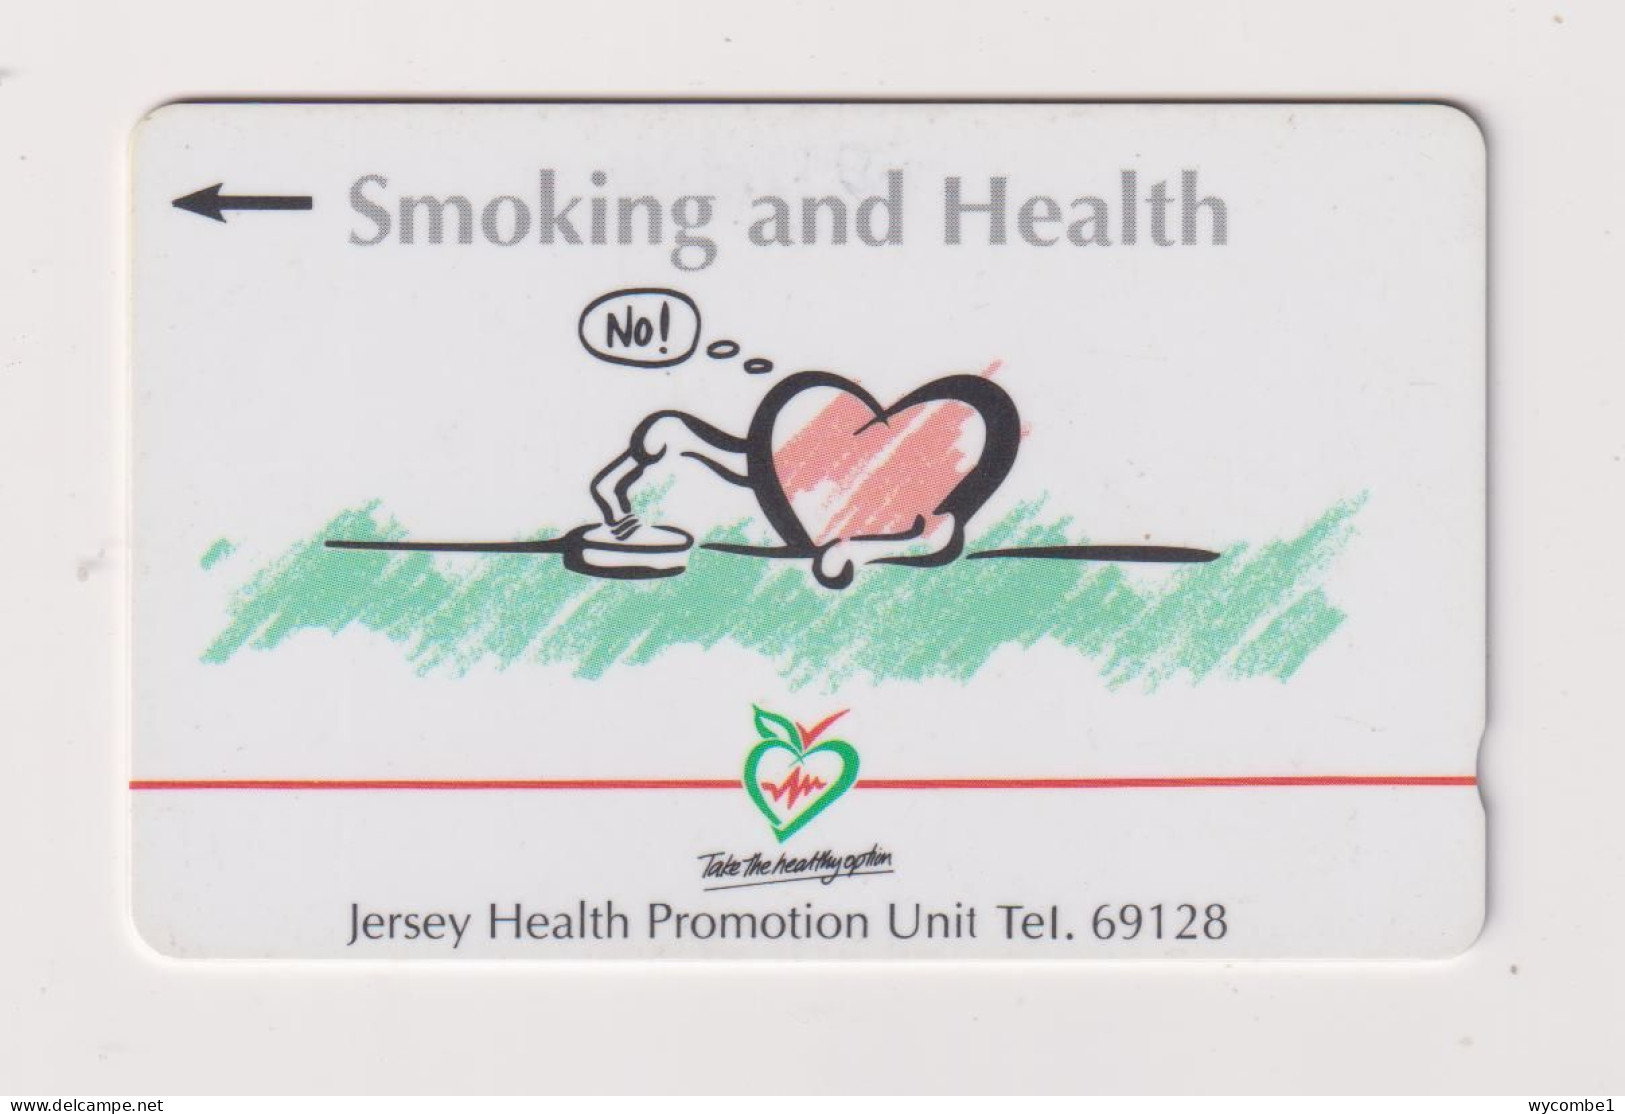 JERSEY -  Smoking And Health GPT Magnetic  Phonecard - [ 7] Jersey And Guernsey